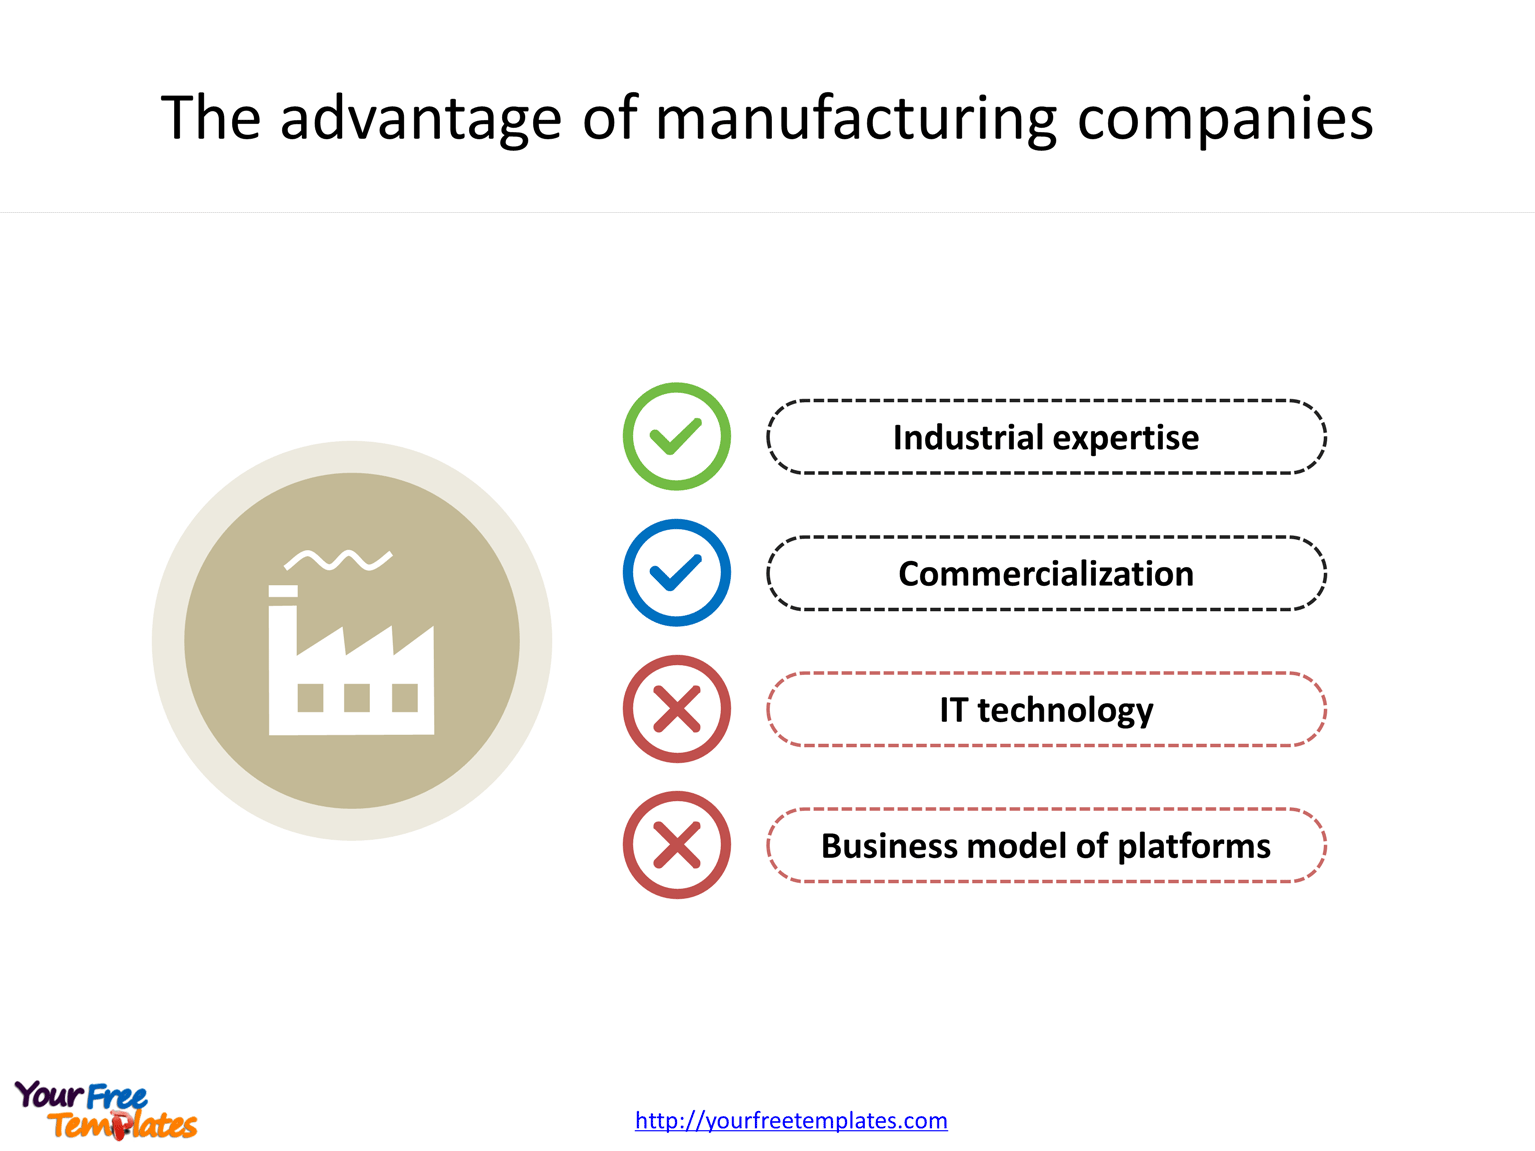 The advantage of manufacturing companies